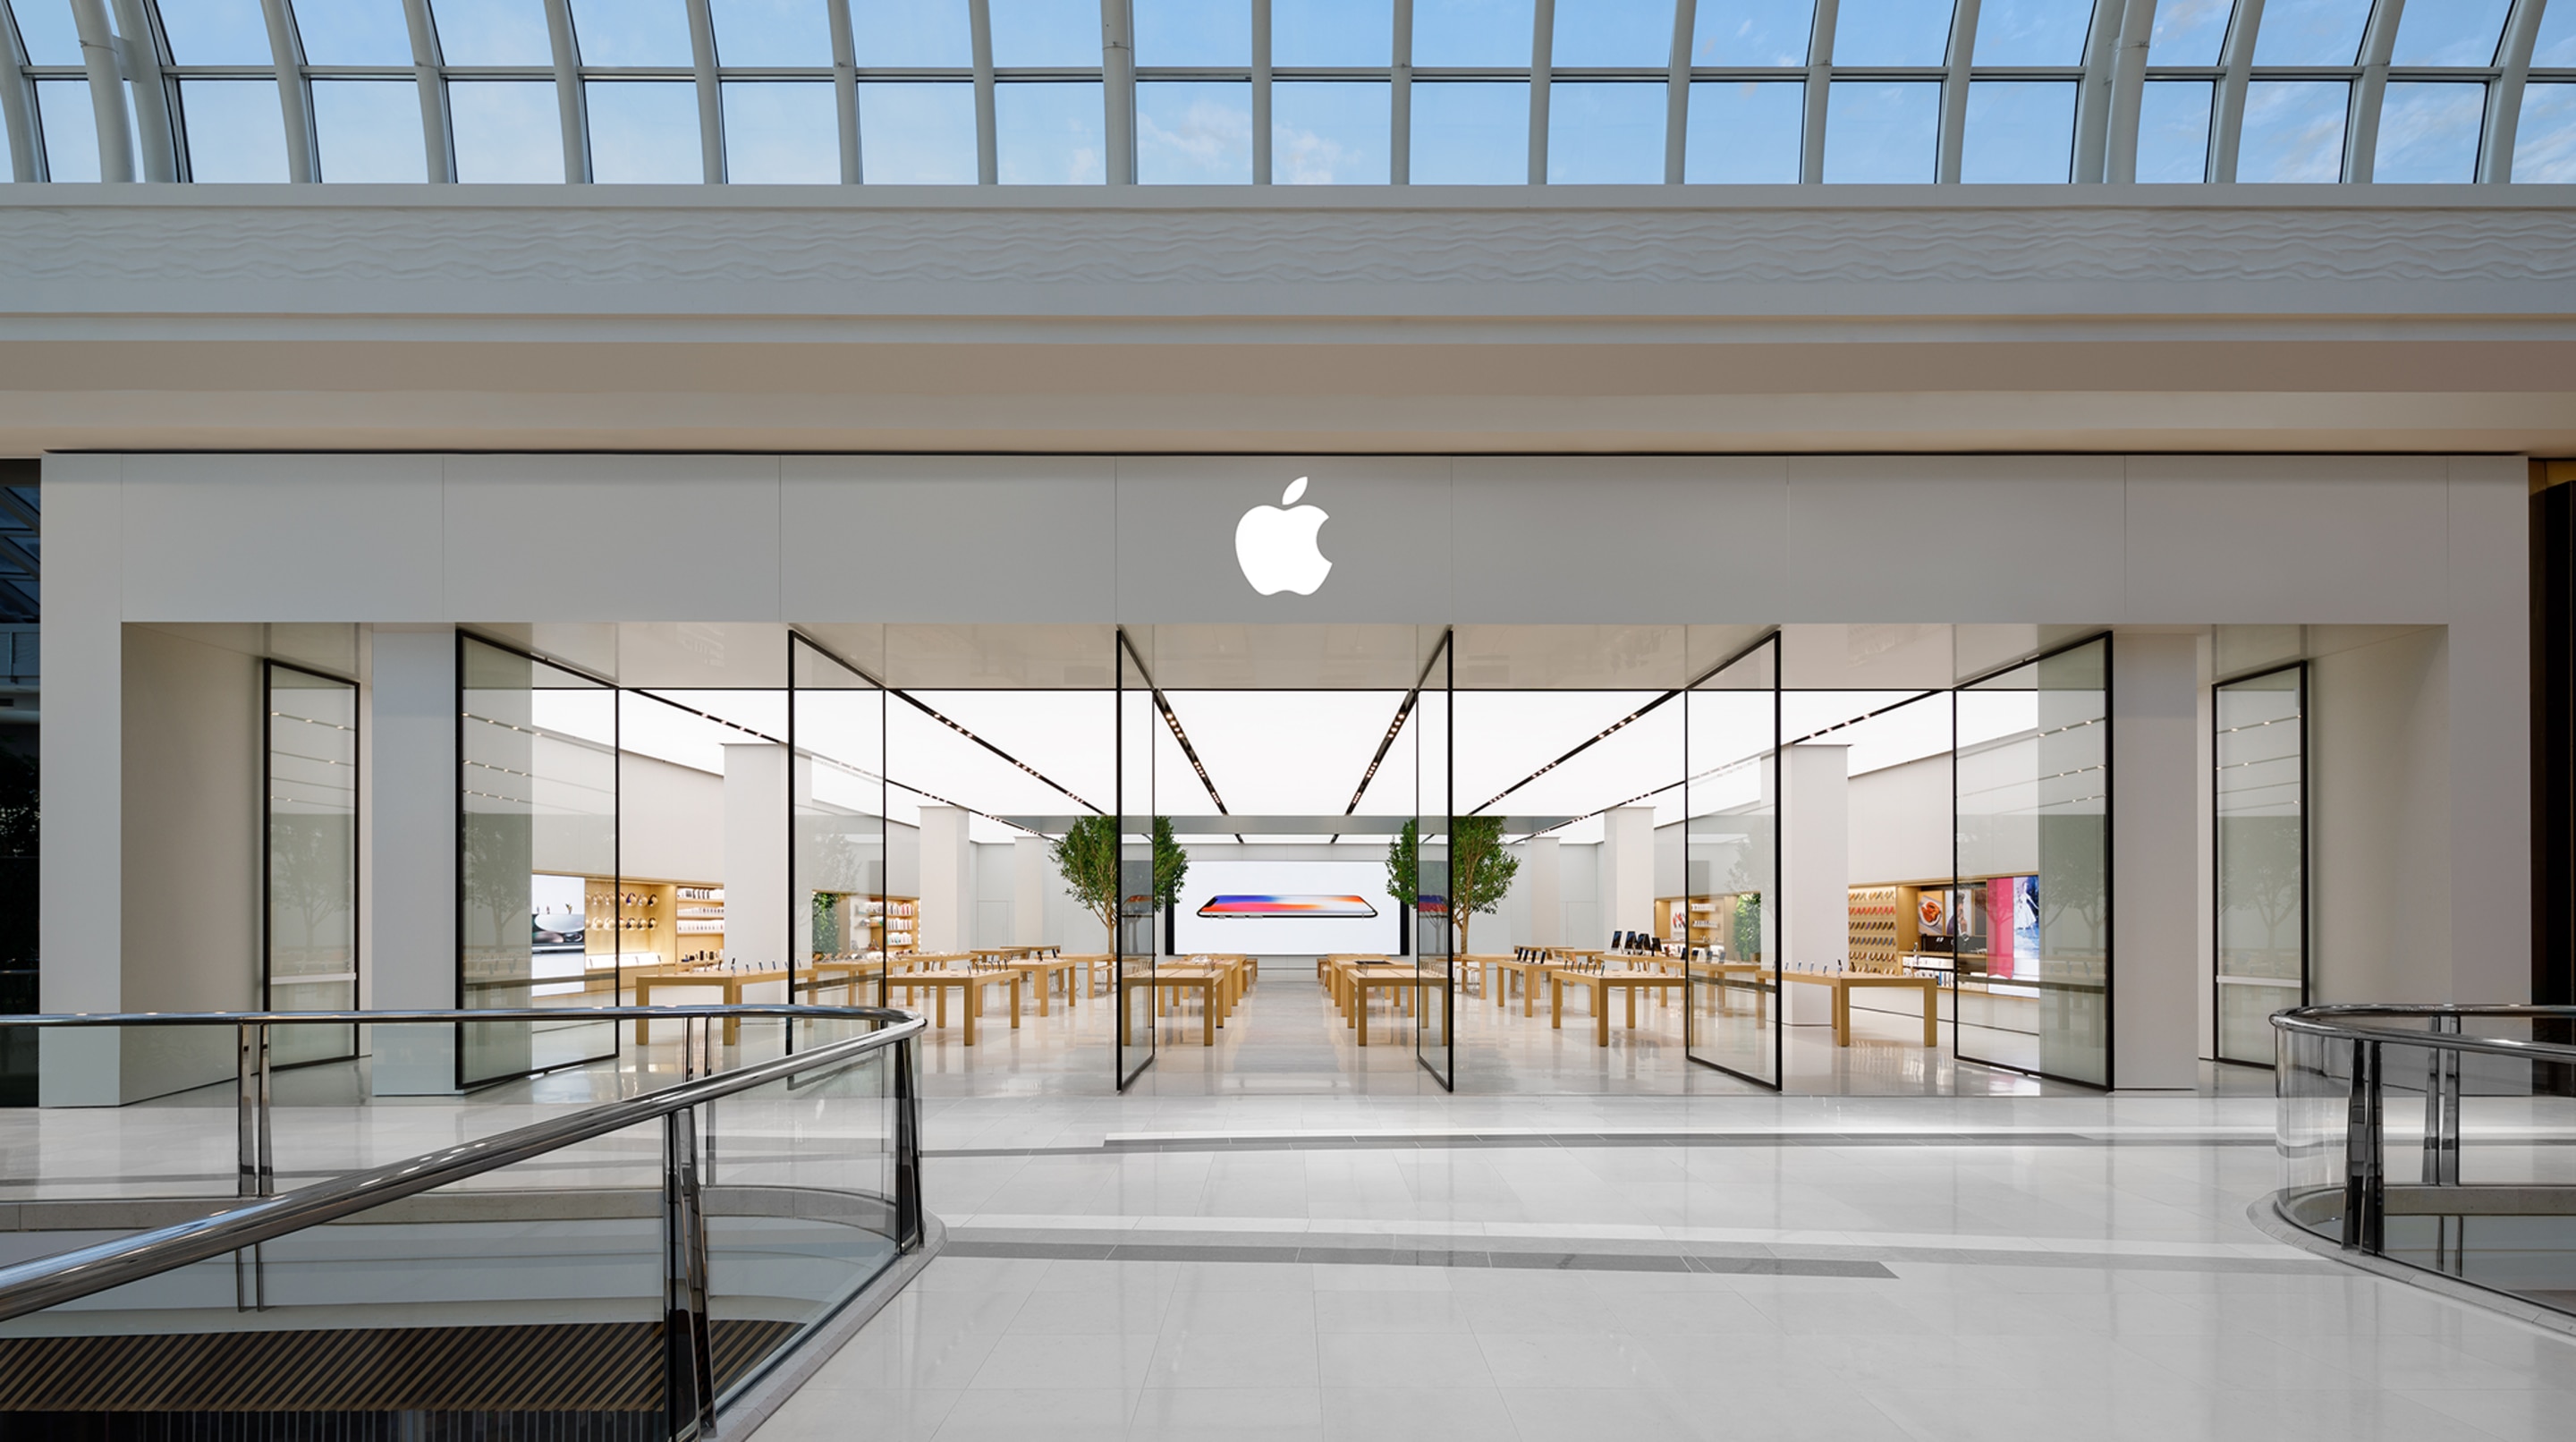 Apple ups education and healthcare benefits, but not for unionized employees; Australia workers set to strike